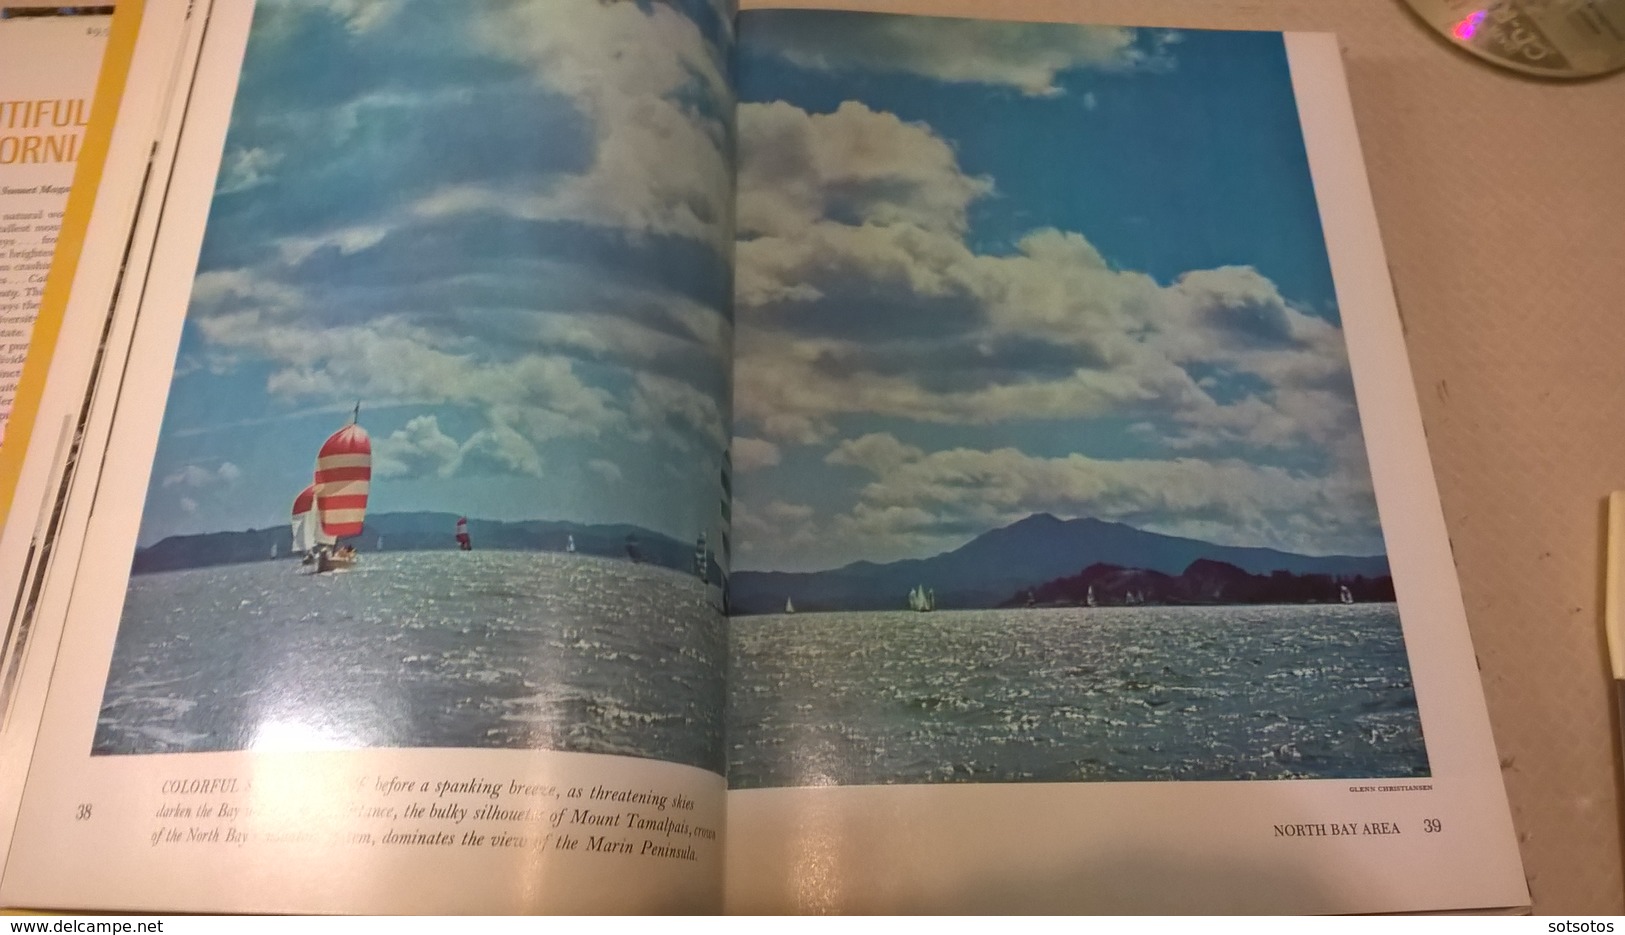 BEAUTIFUL CALIFORNIA - A SunsetPictorial by the Editors of Sunset Booksand Sunset Magazine (1969) 288 illustrated pages